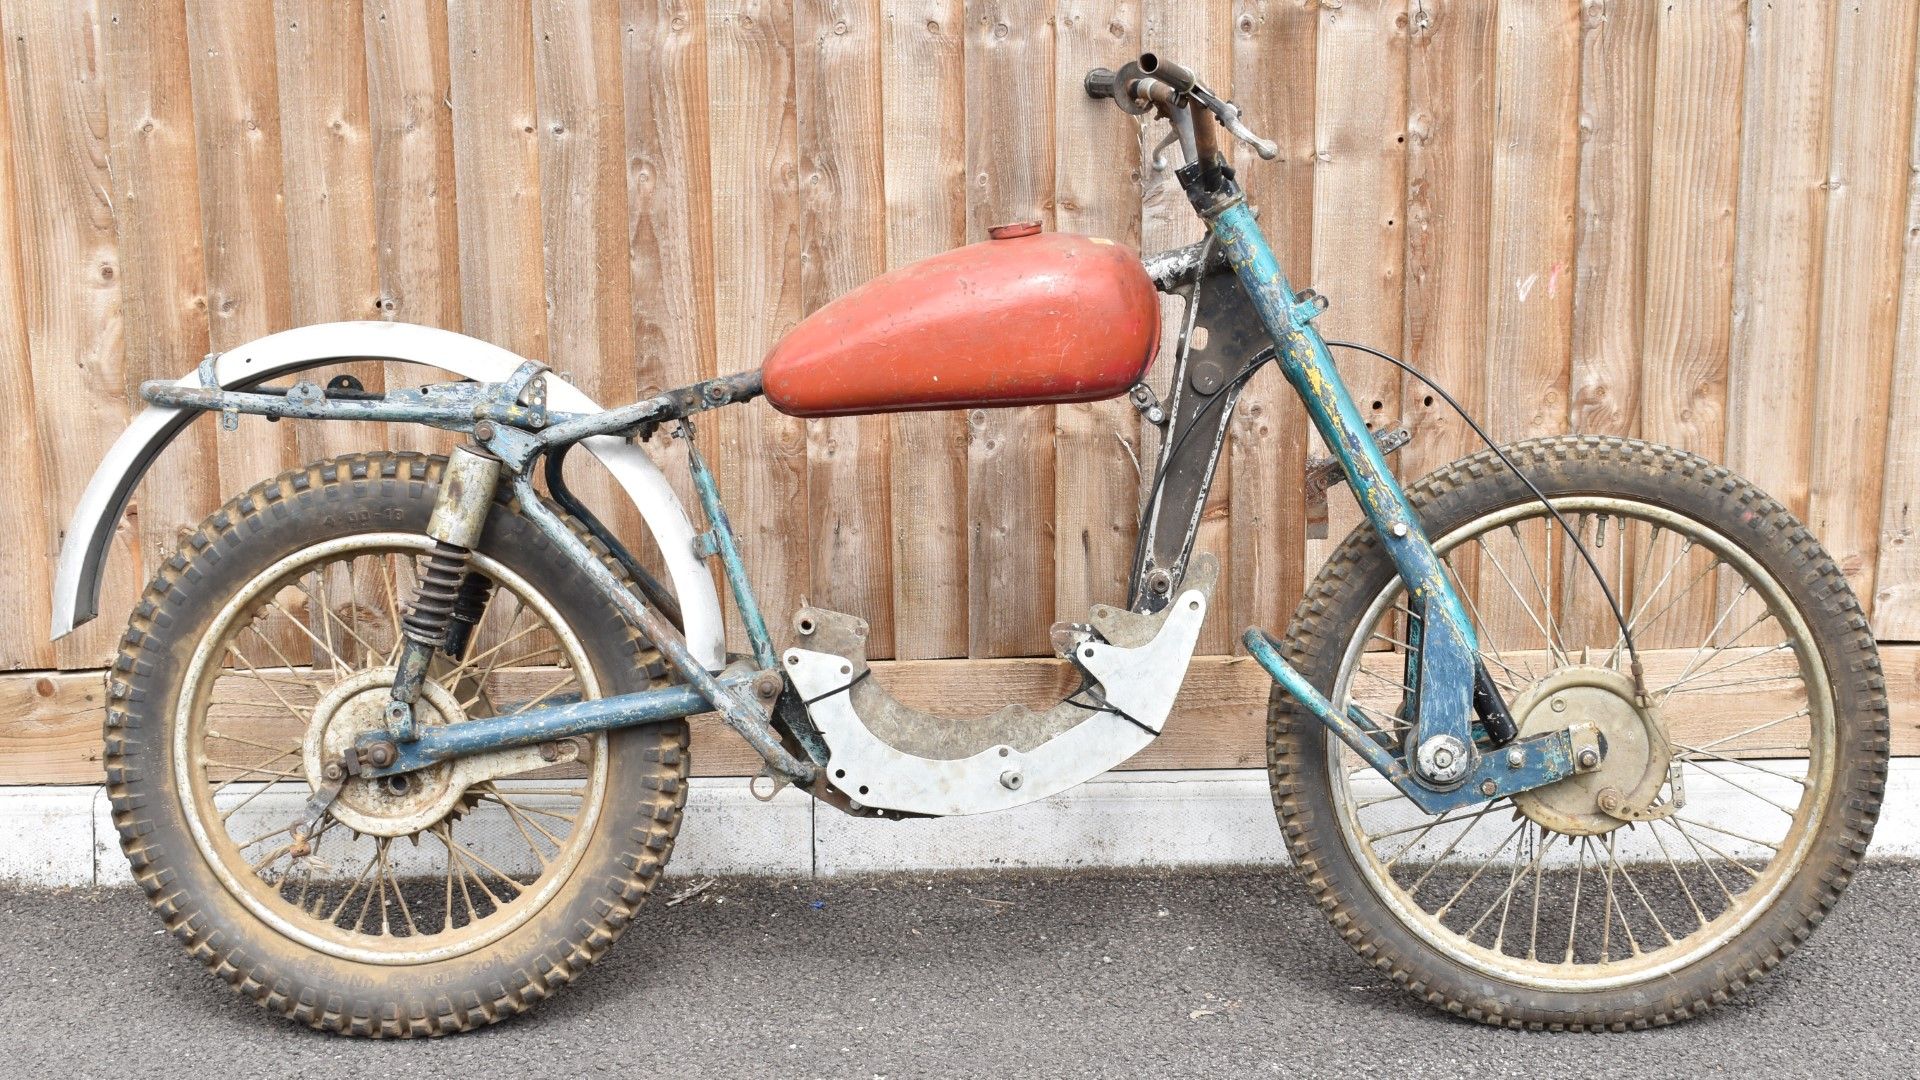 Greeves trials motorcycle, frame number 9146/TA 10%+VAT buyer's premium on this lot - Image 8 of 13